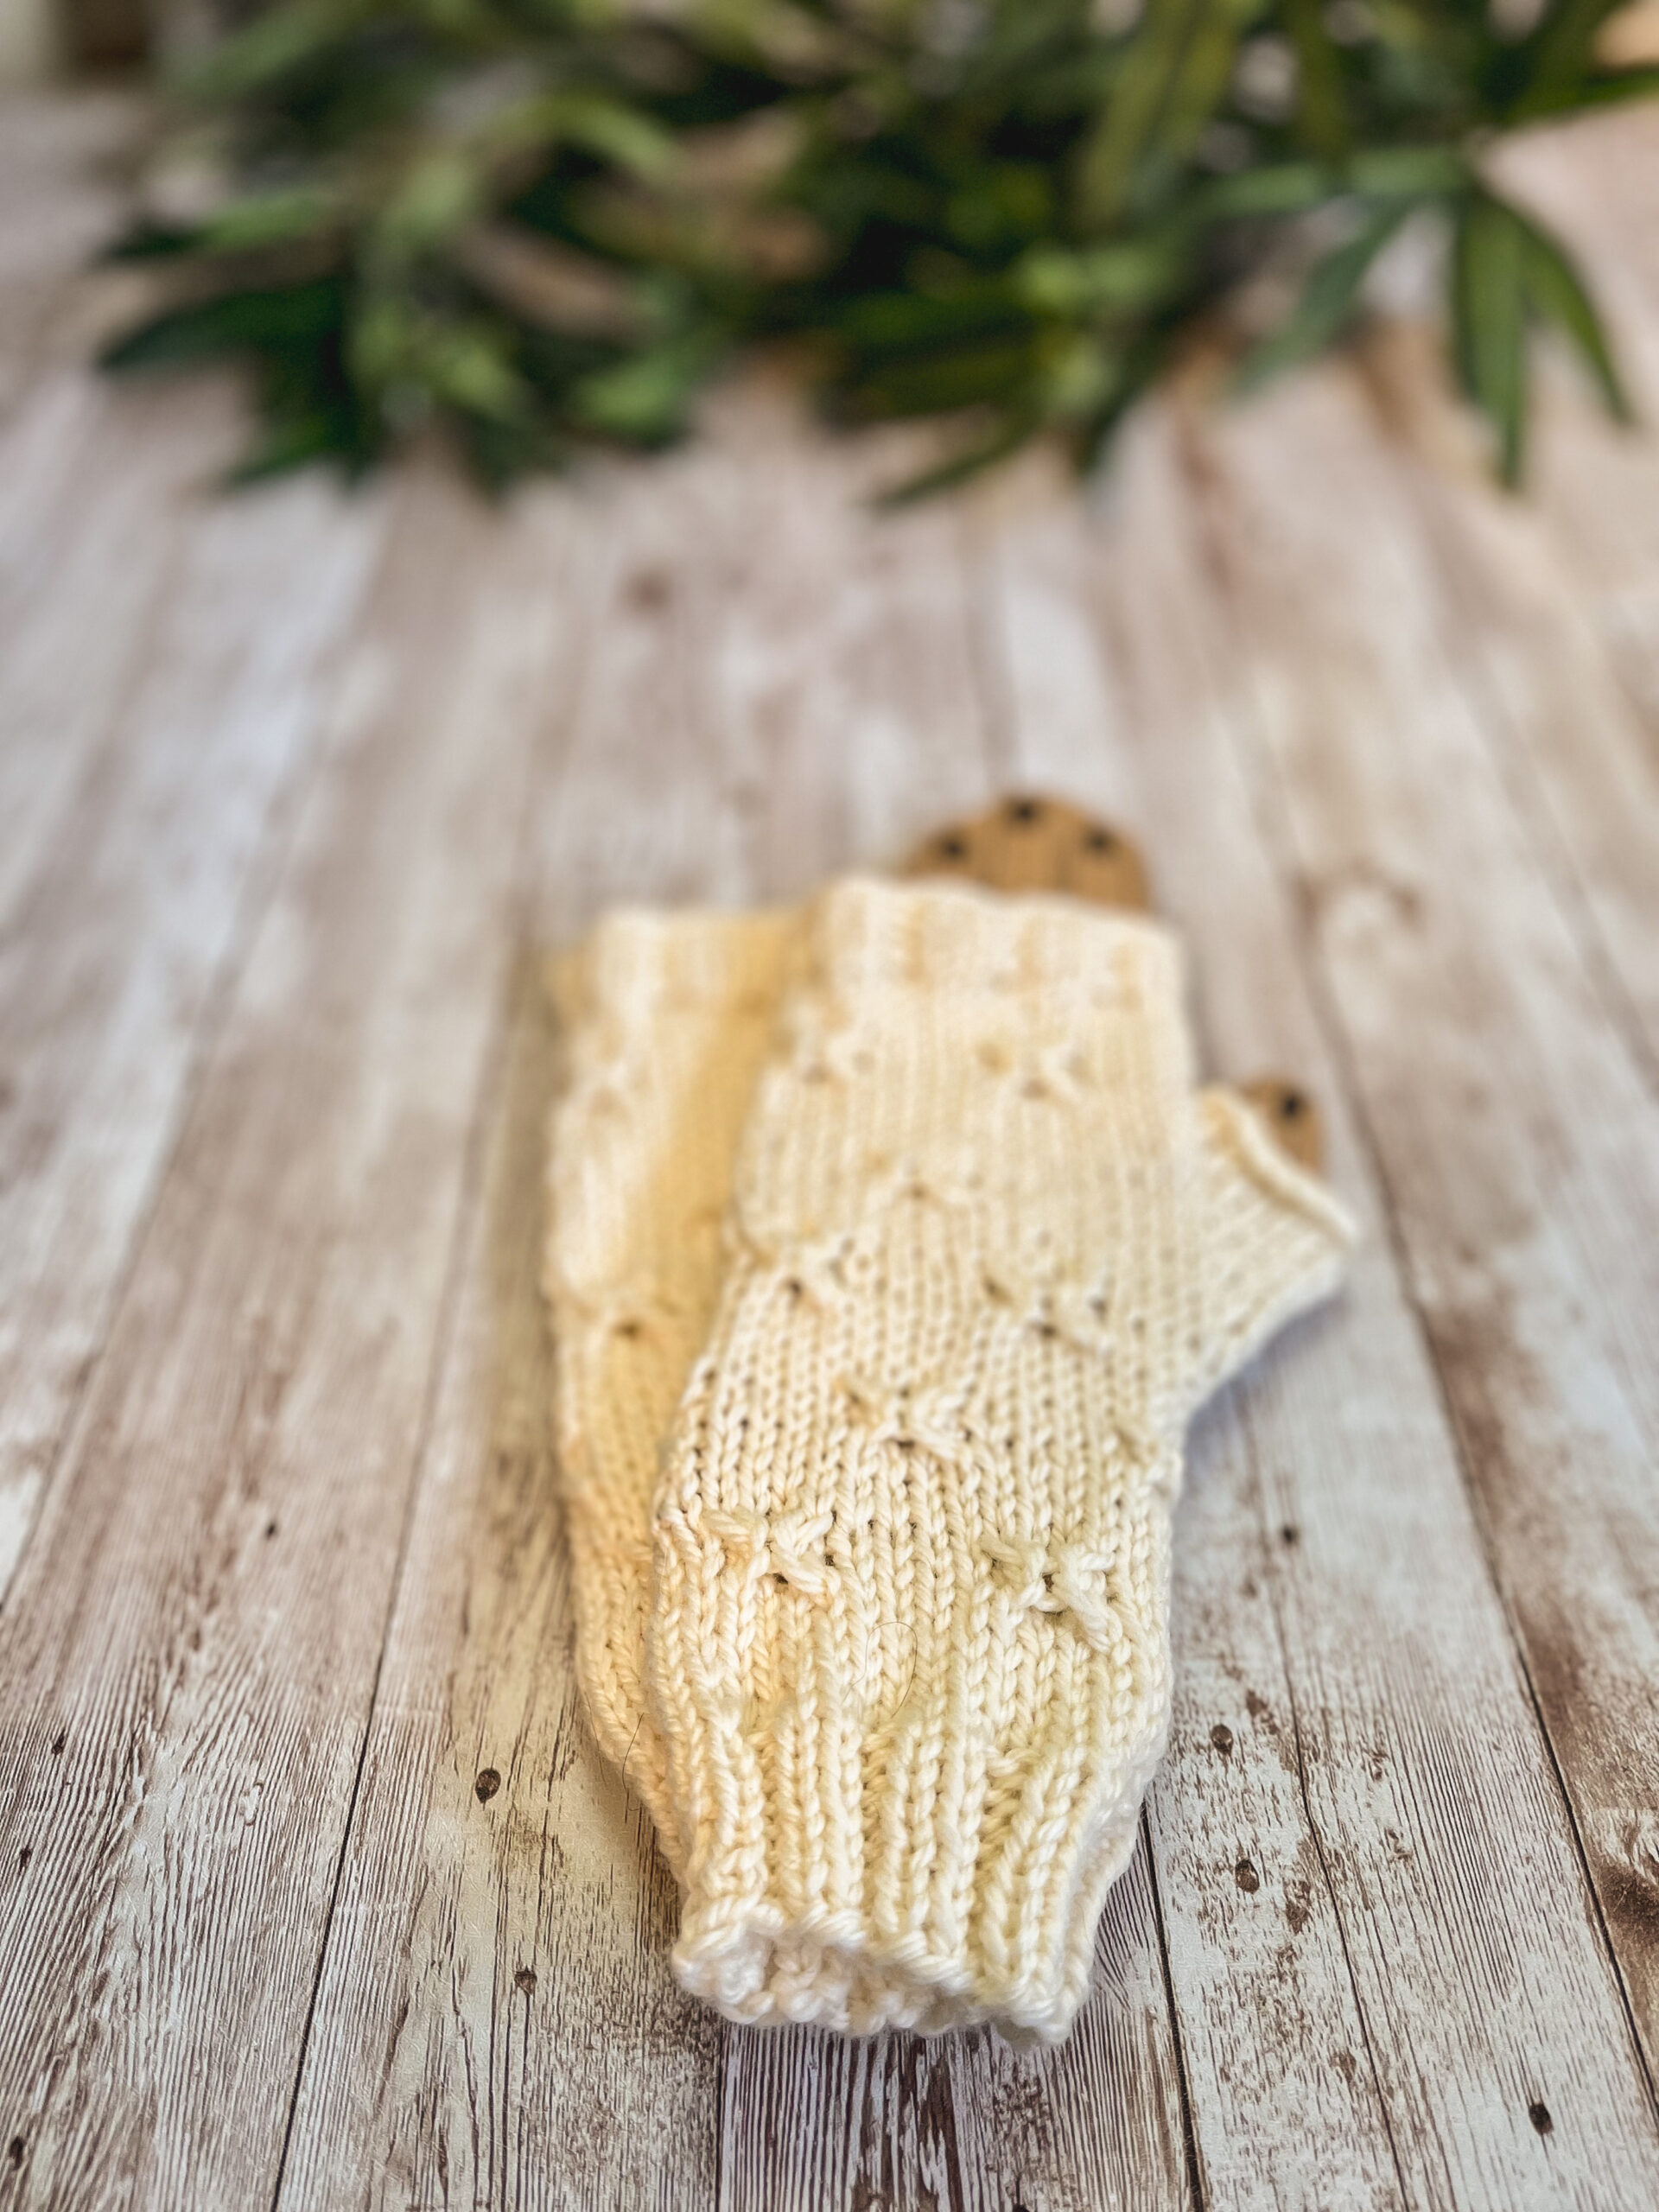 A pair of off white fingerless mitts with a decorative gathered pattern sit on a wood plank with greenery in the background